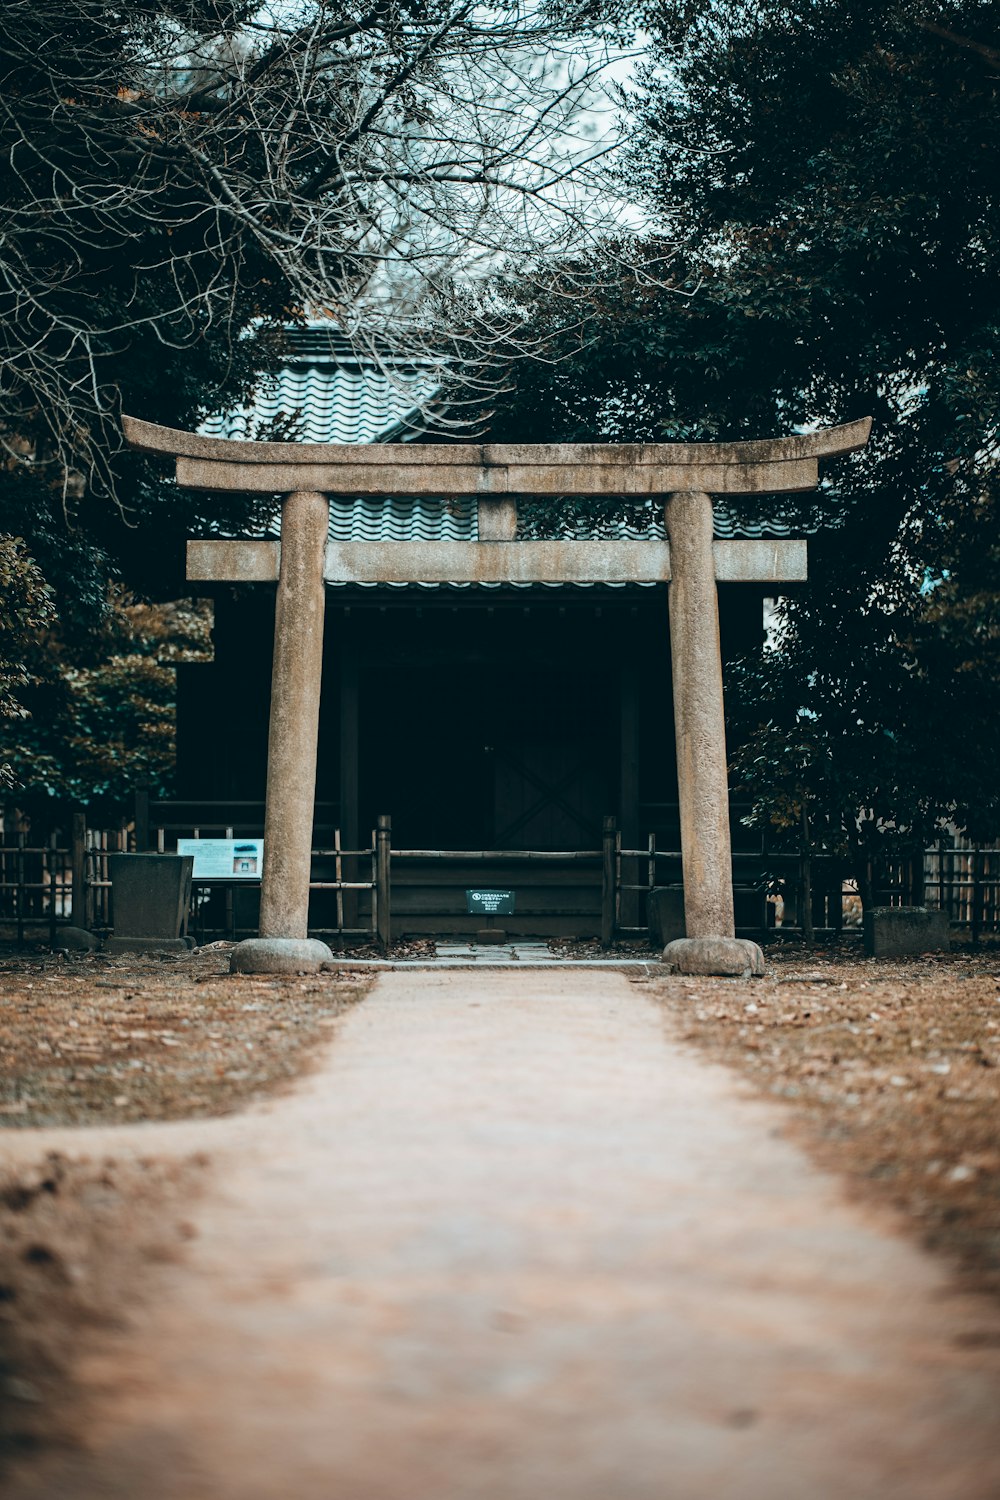 a wooden structure in the middle of a park